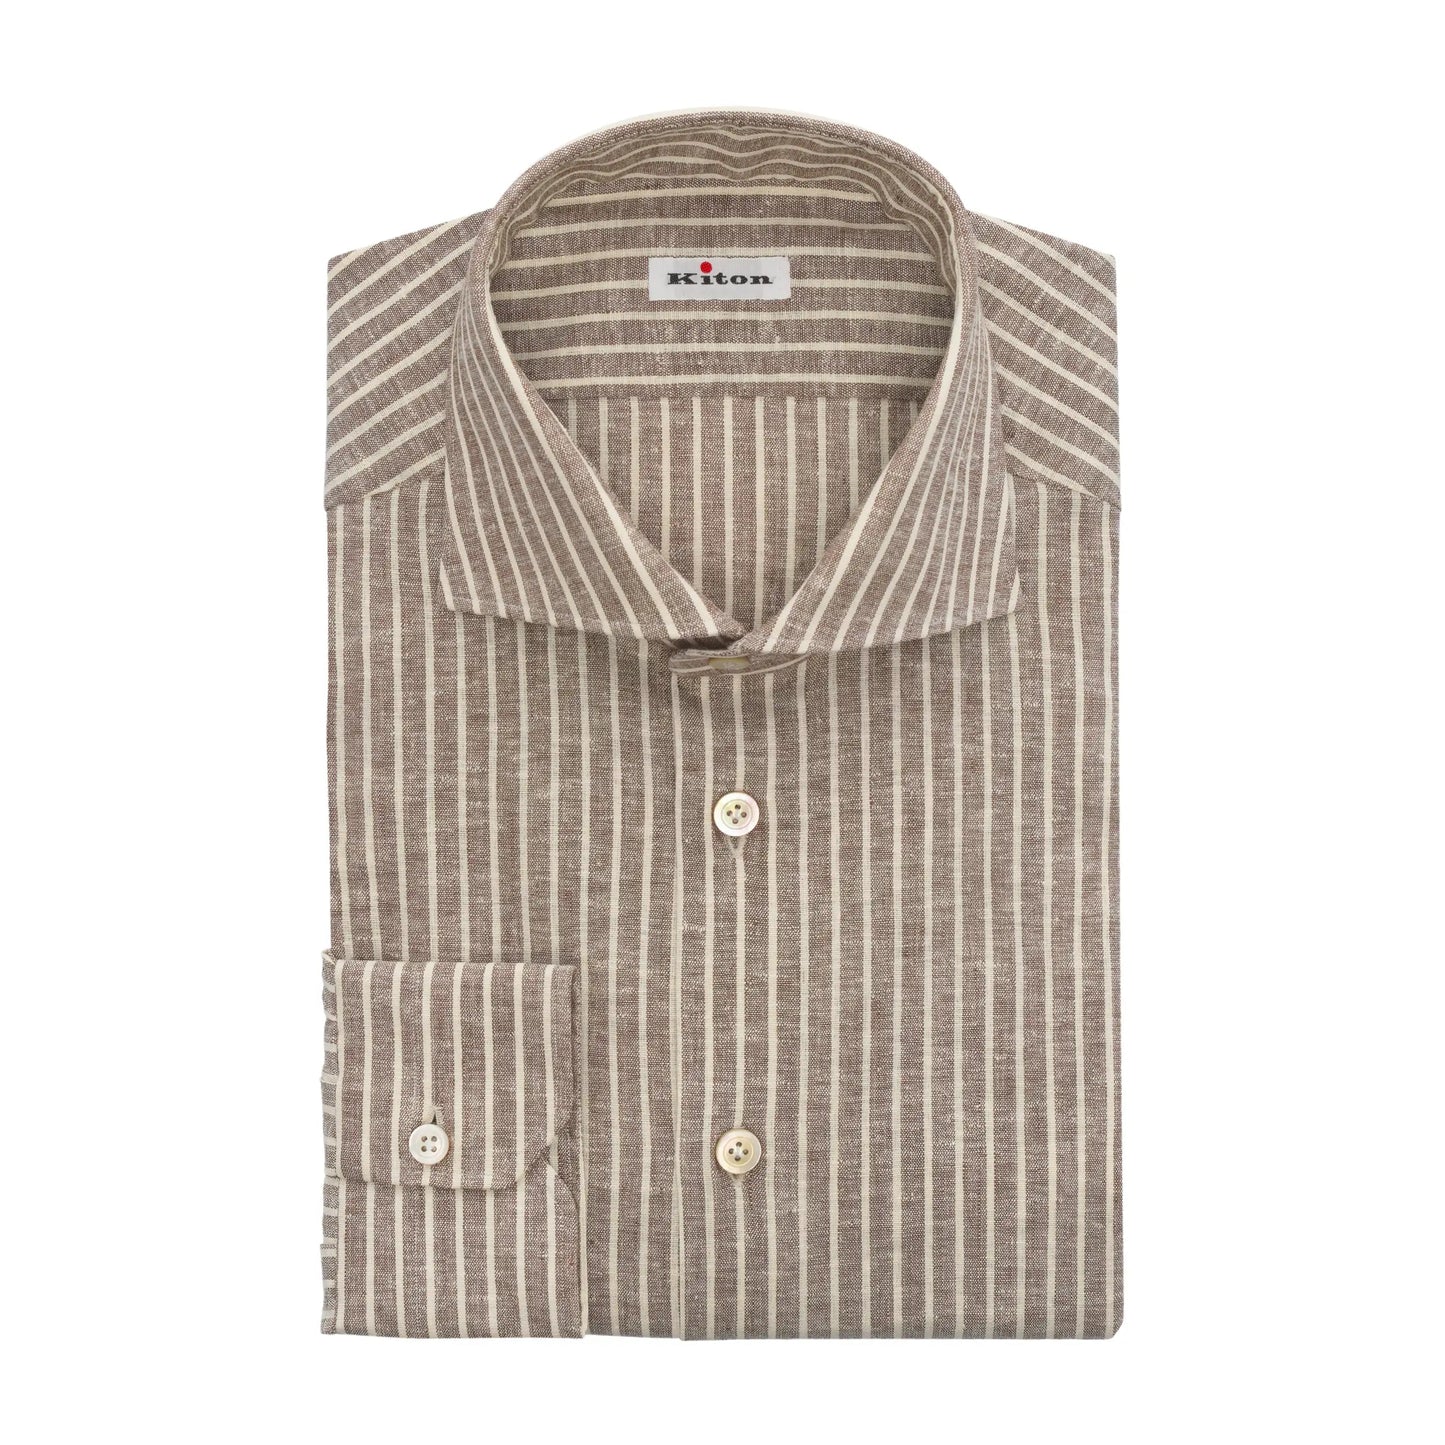 Kiton Linen Striped Shirt in Brown and White - SARTALE